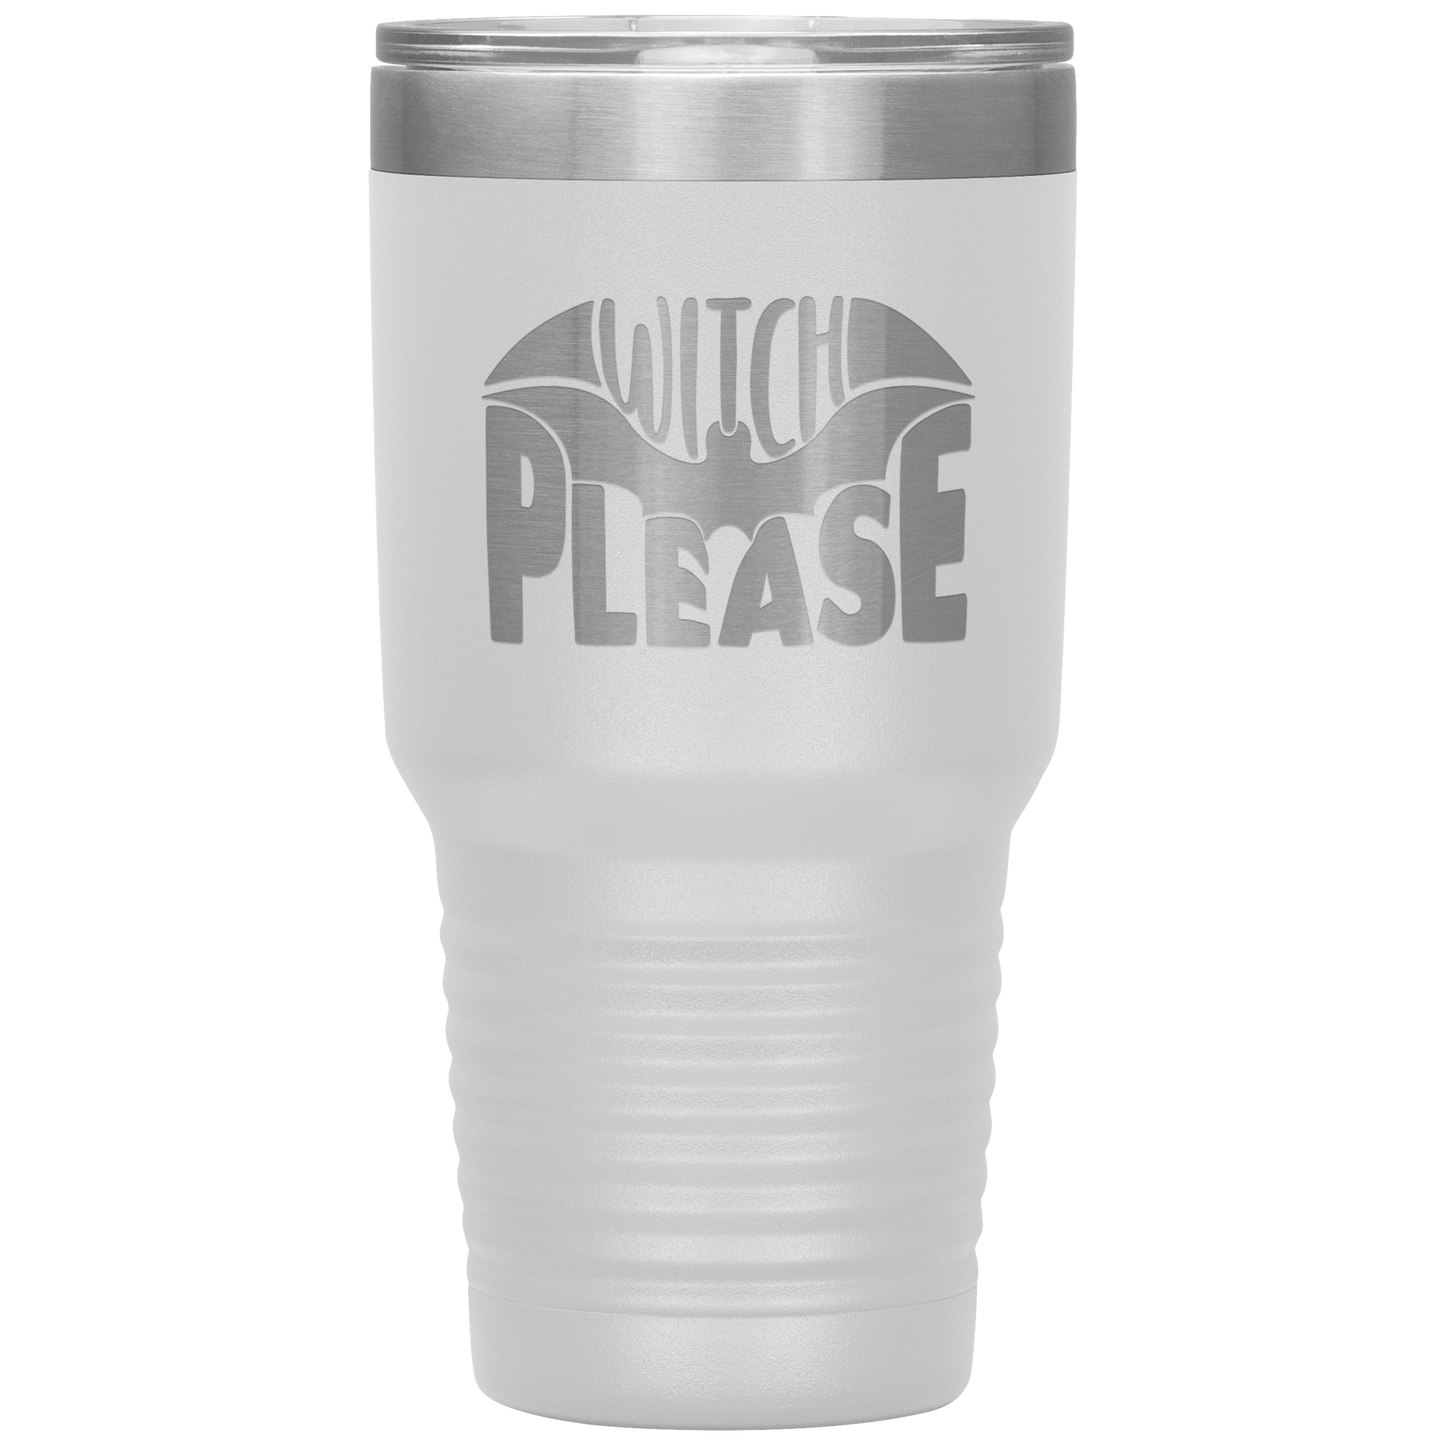 Funny Witch Halloween Tumbler Witch Please Tumbler Cup Funny Tumbler Insulated Mug